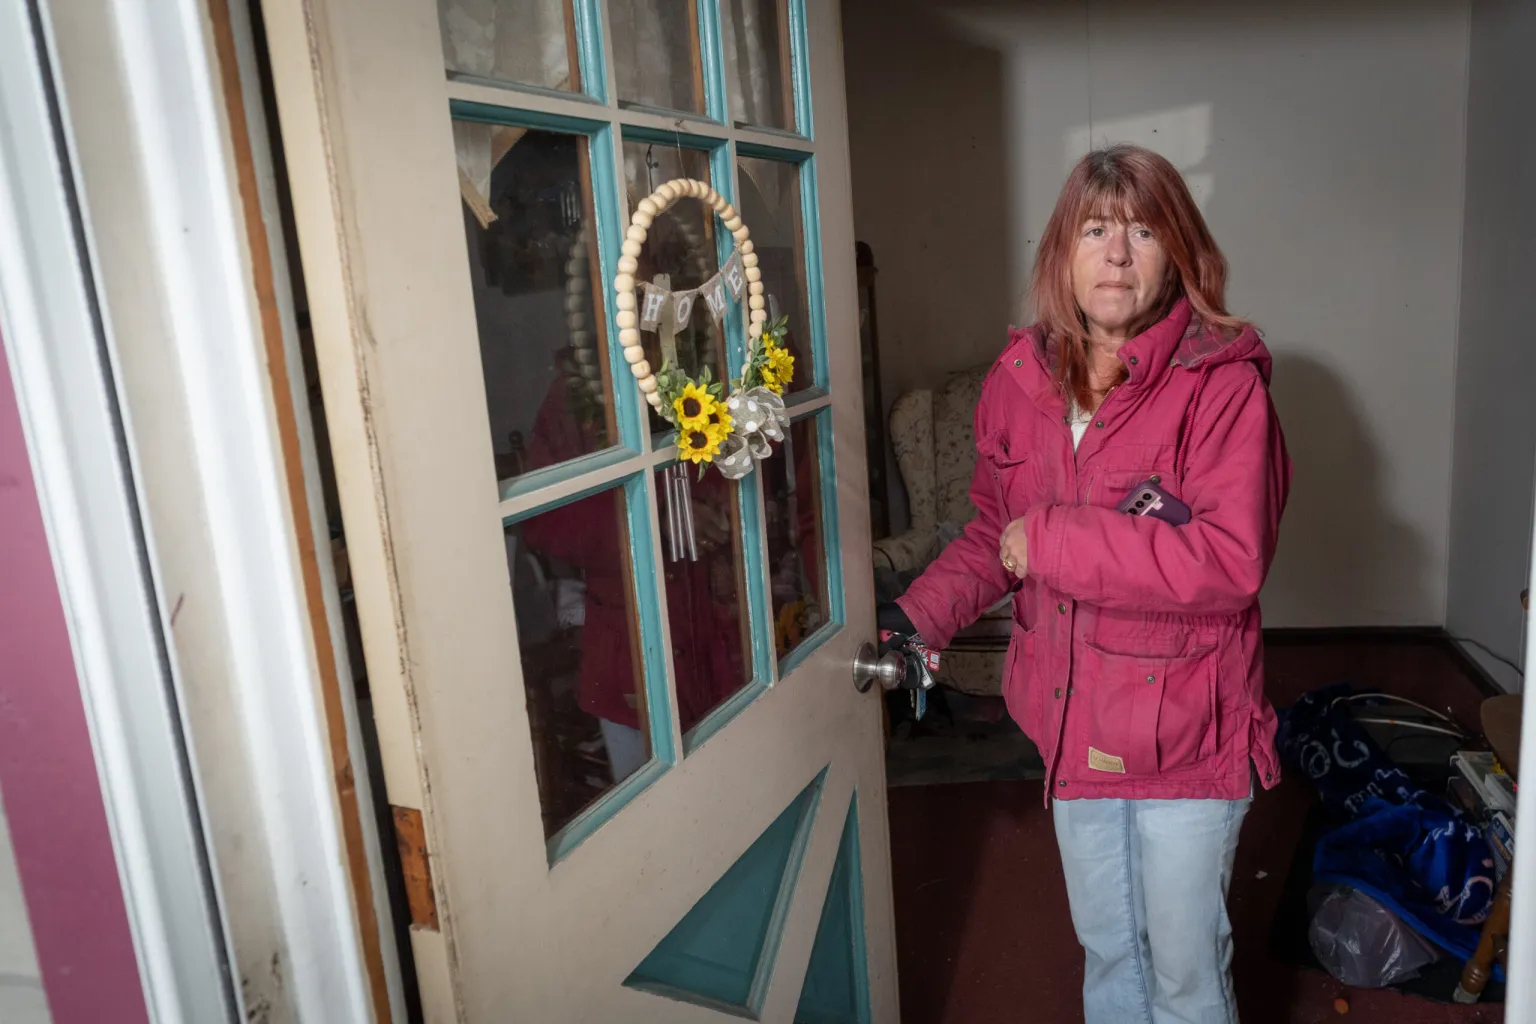 A woman wearing a pink jacket opening her front door.